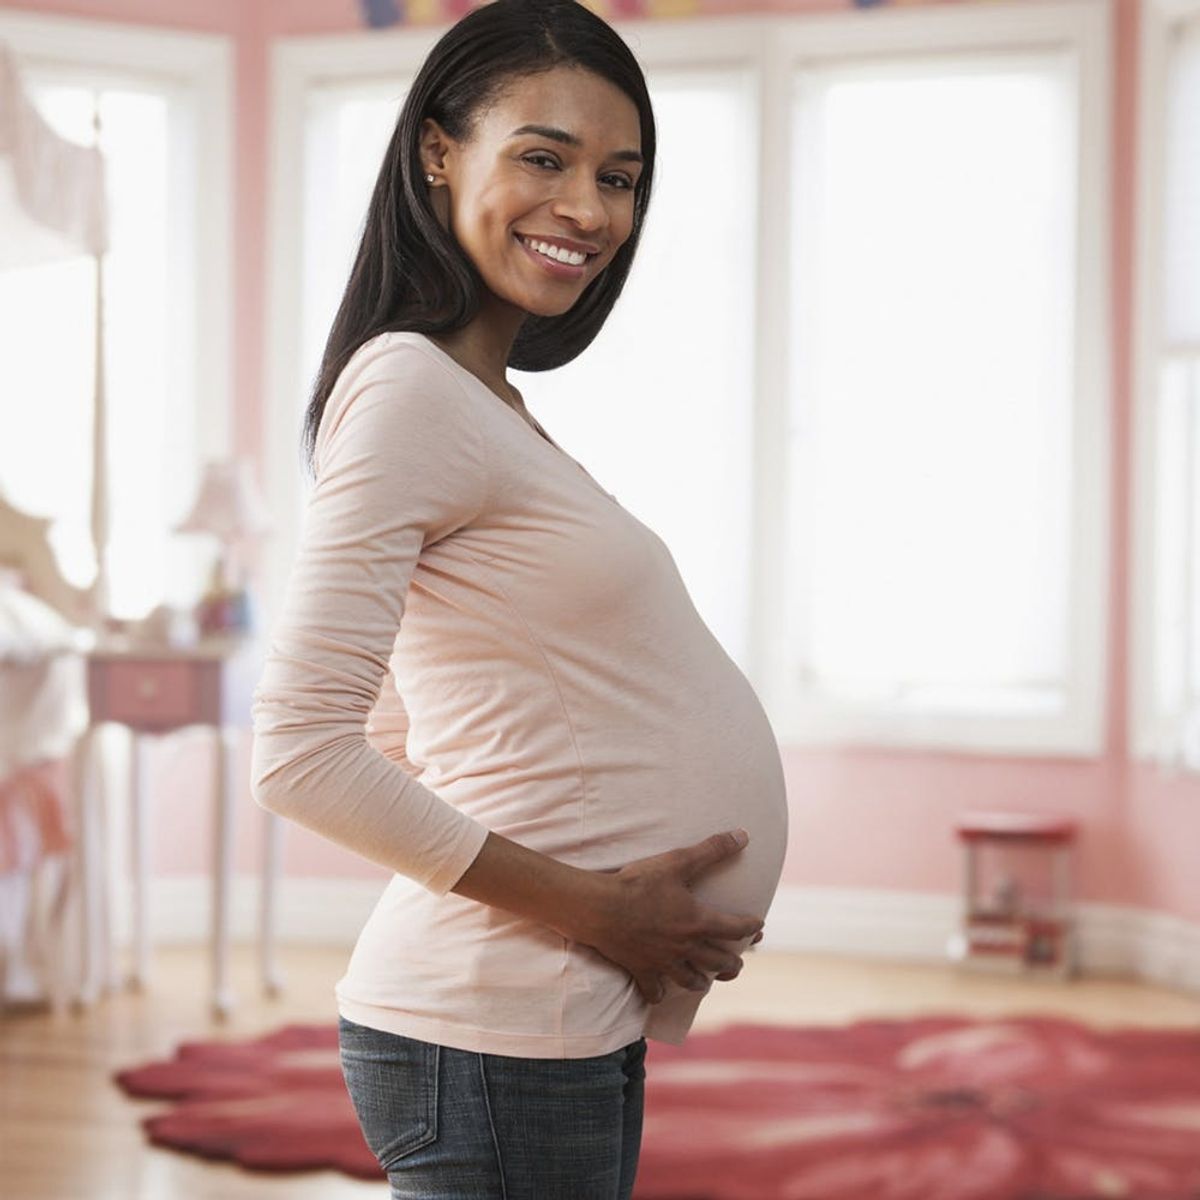 A Feritility Doctor Says This Is the Ideal Age to Get Pregnant